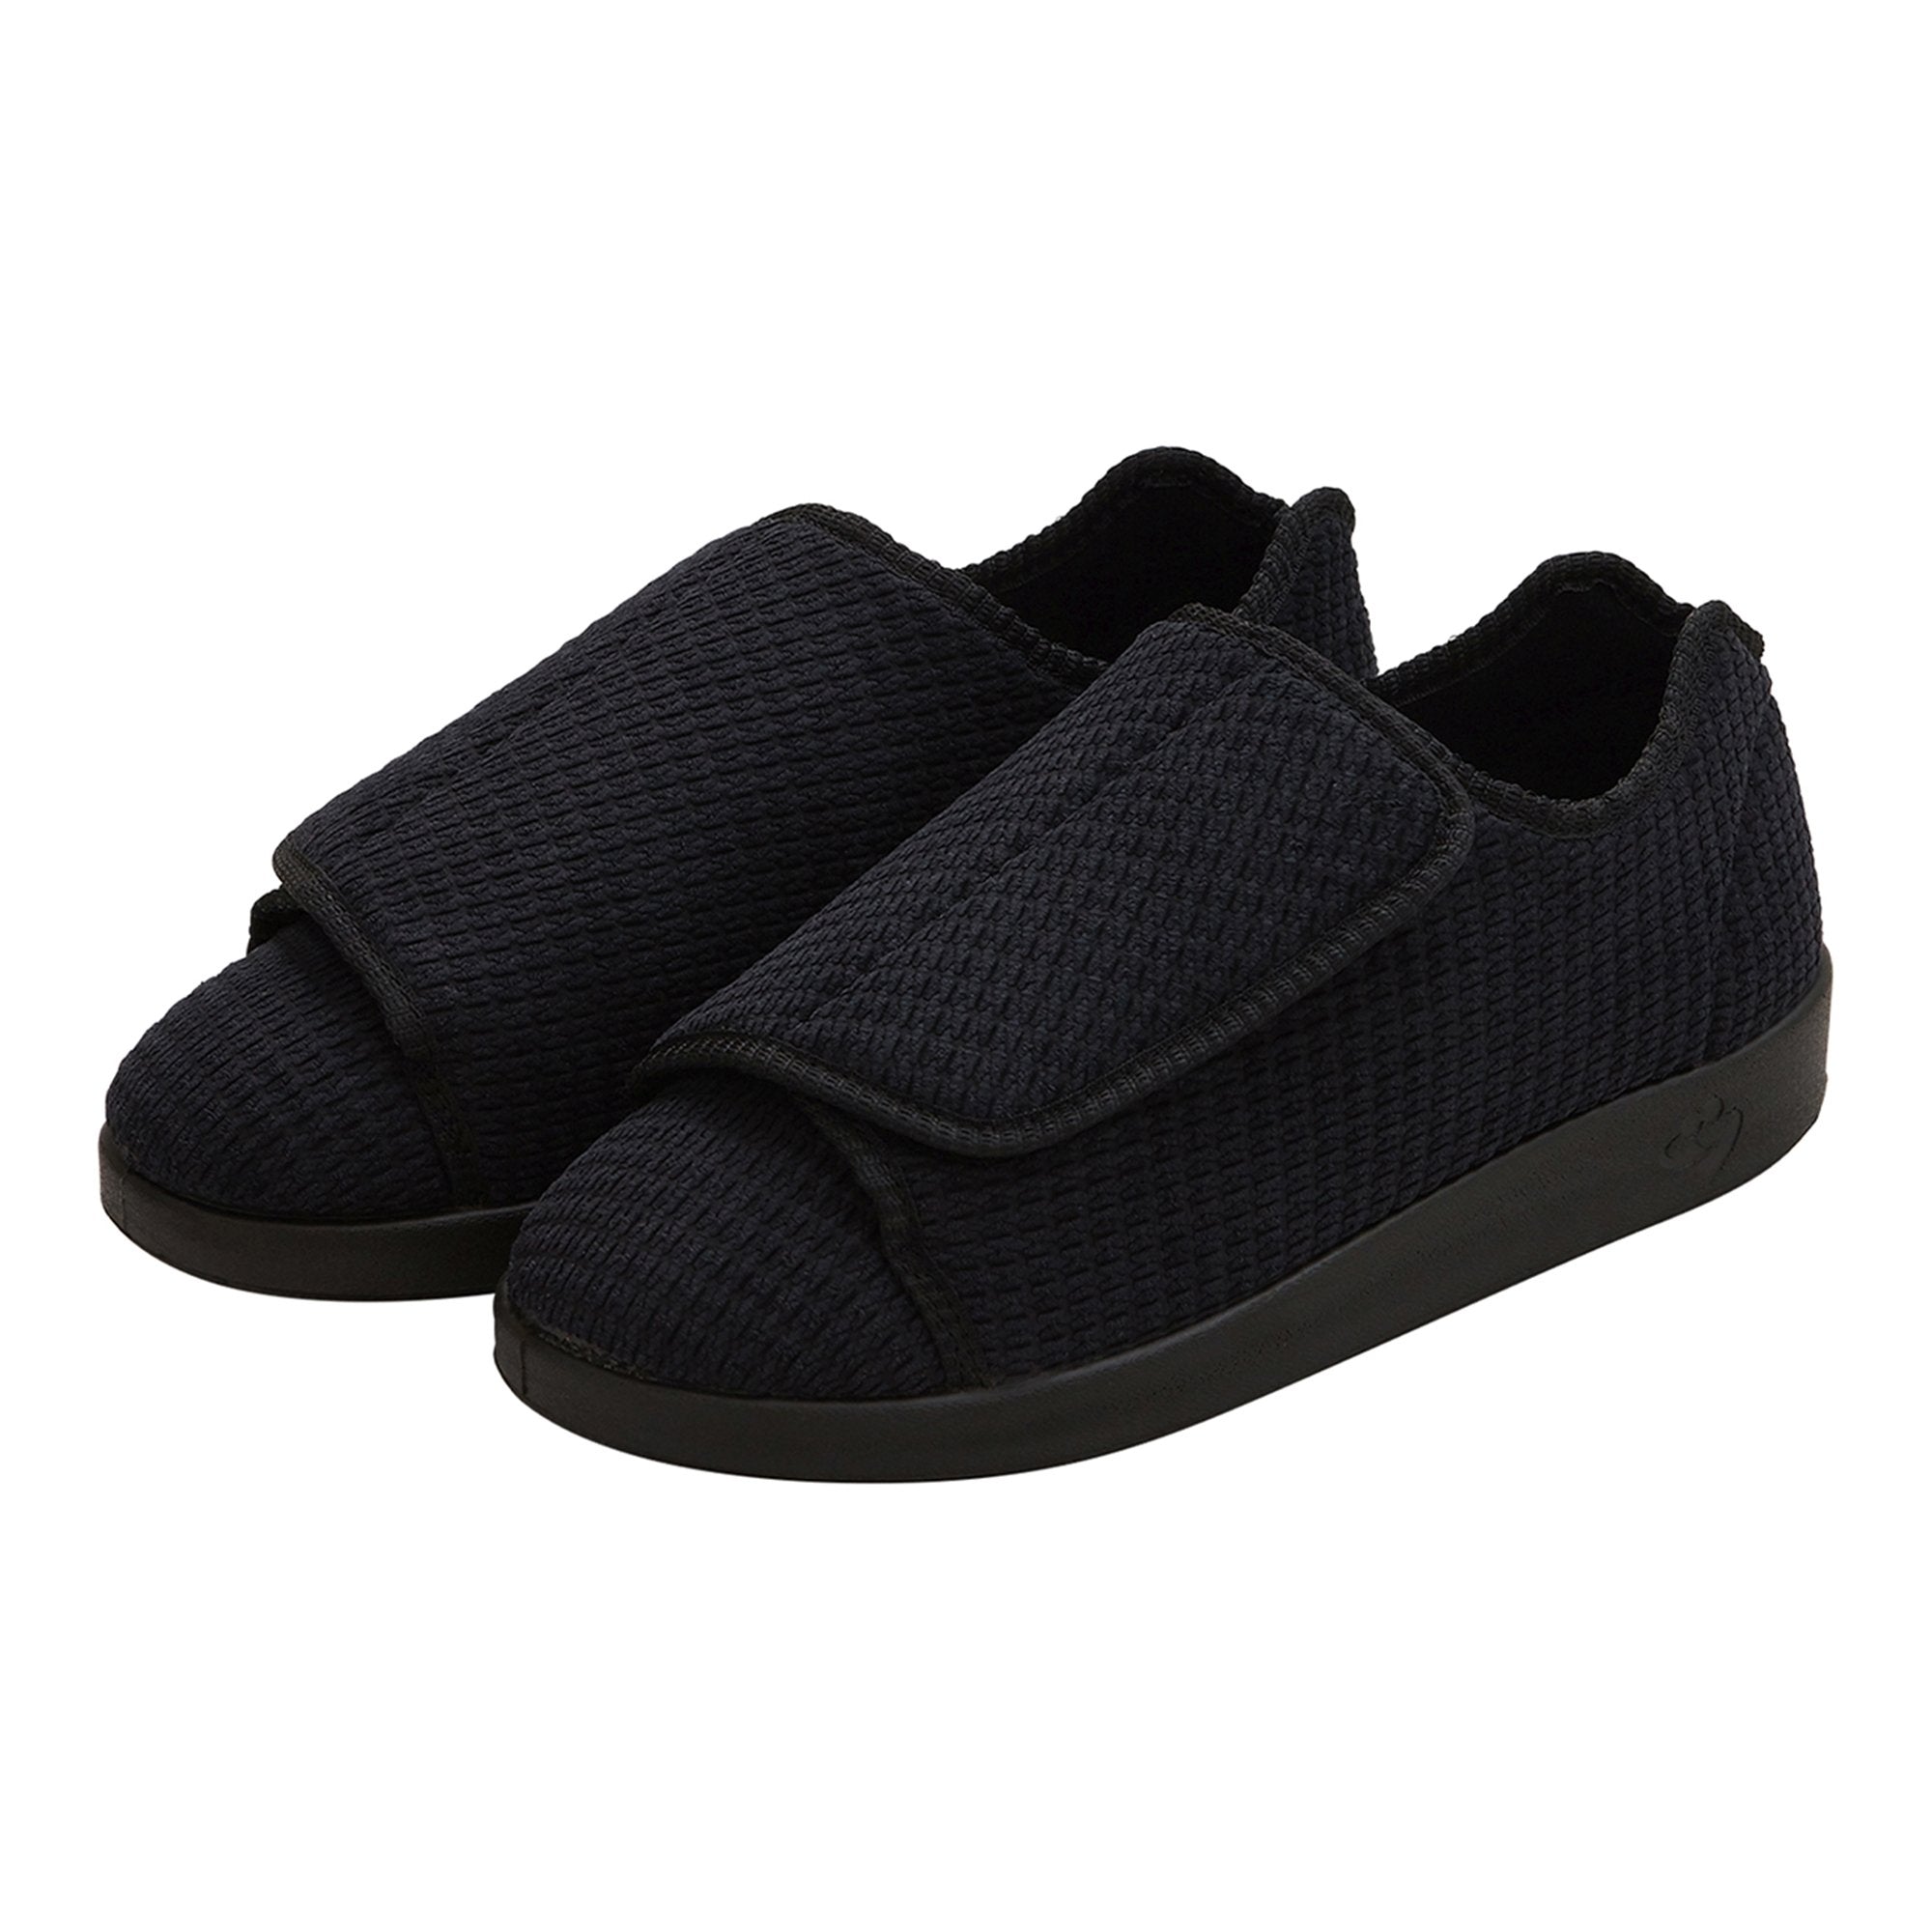 Slippers Silverts® Size 12 / 2X-Wide Black